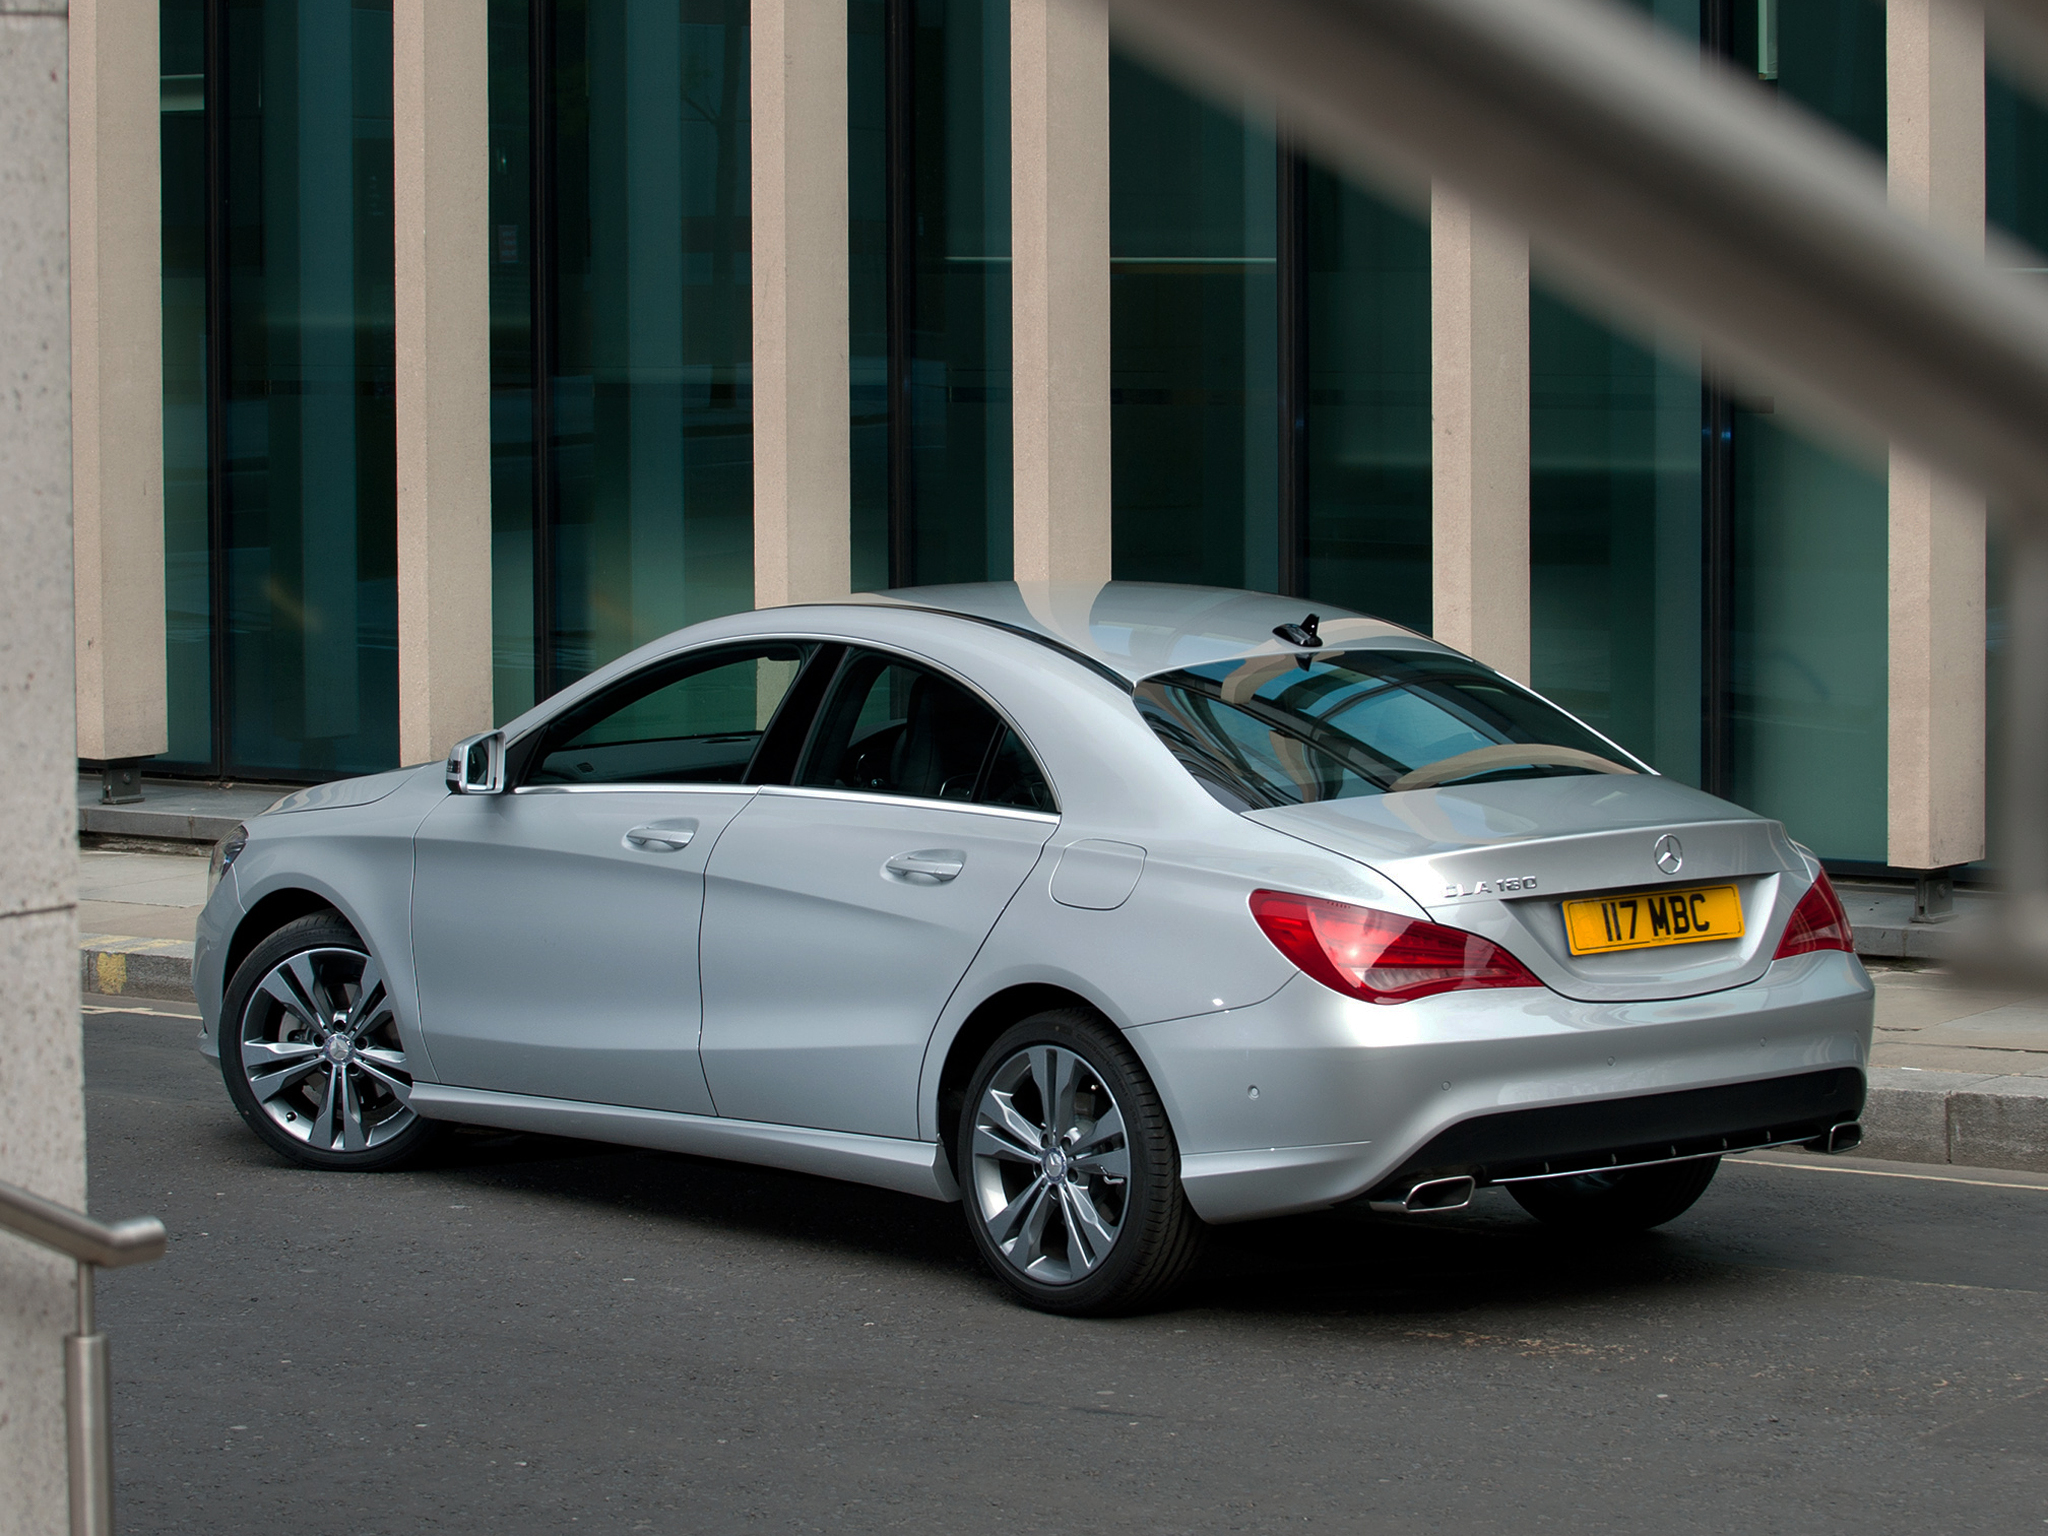 cars, back view, rear view, mercedes benz, silver, silvery, cla 180